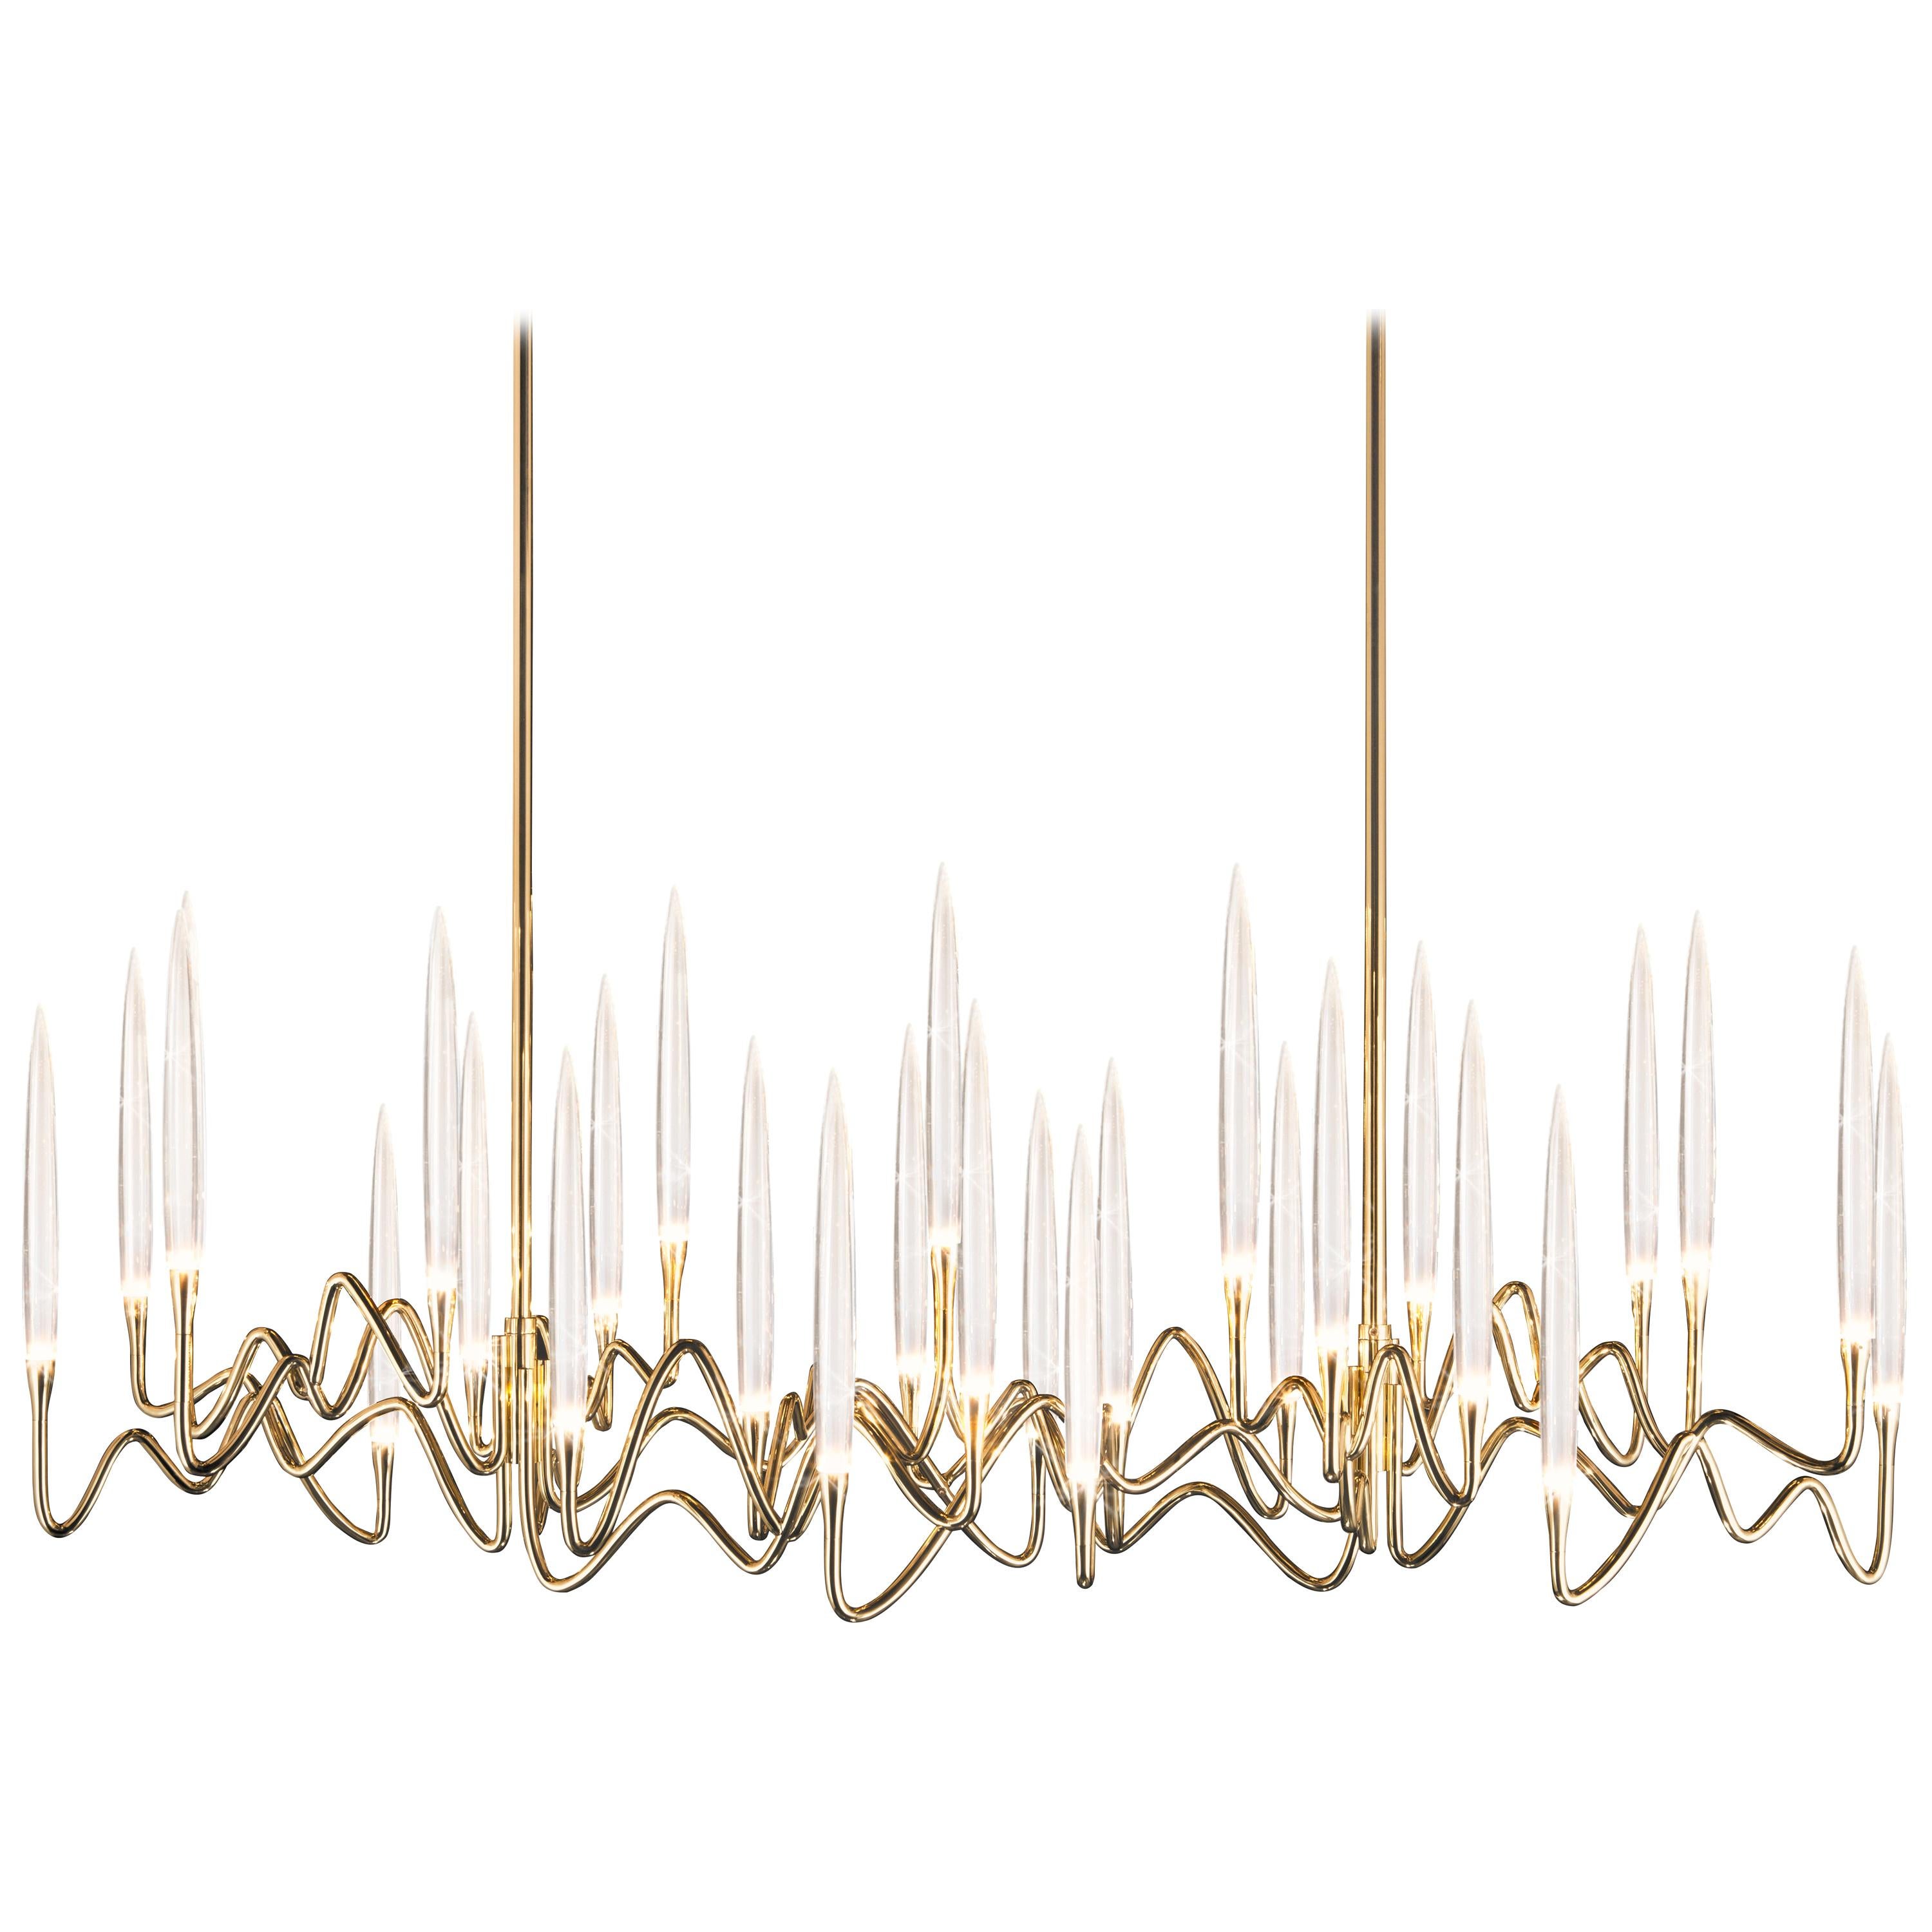 Il Pezzo 3 "Long Chandelier" Crystal with a Handmade Forged Gold Brass Structure For Sale